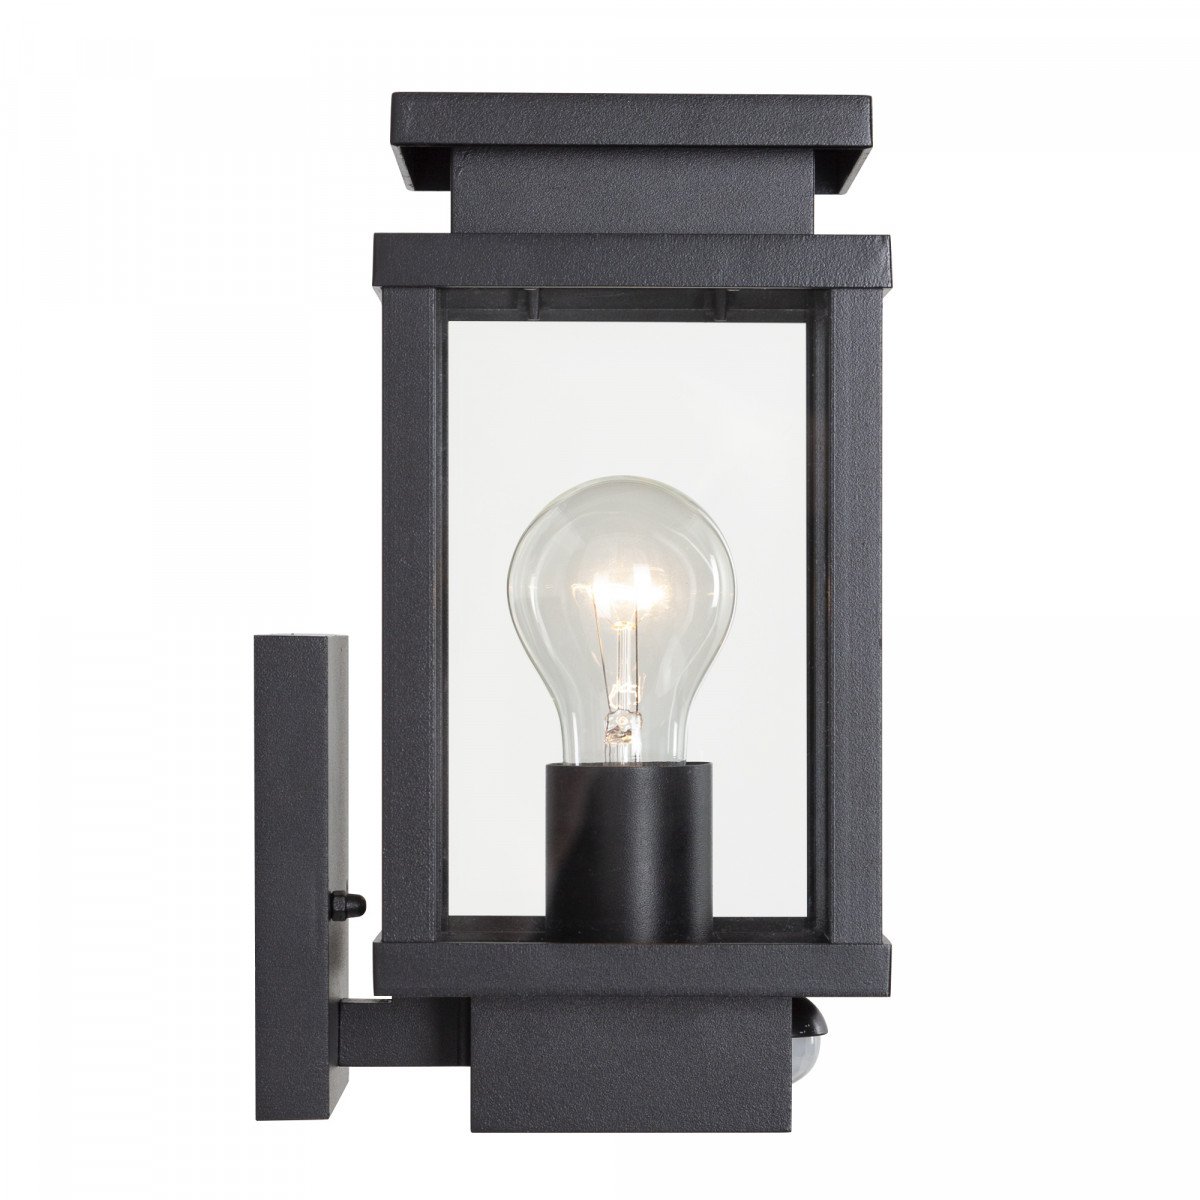 black wall lamp with square shape and windows with real glass